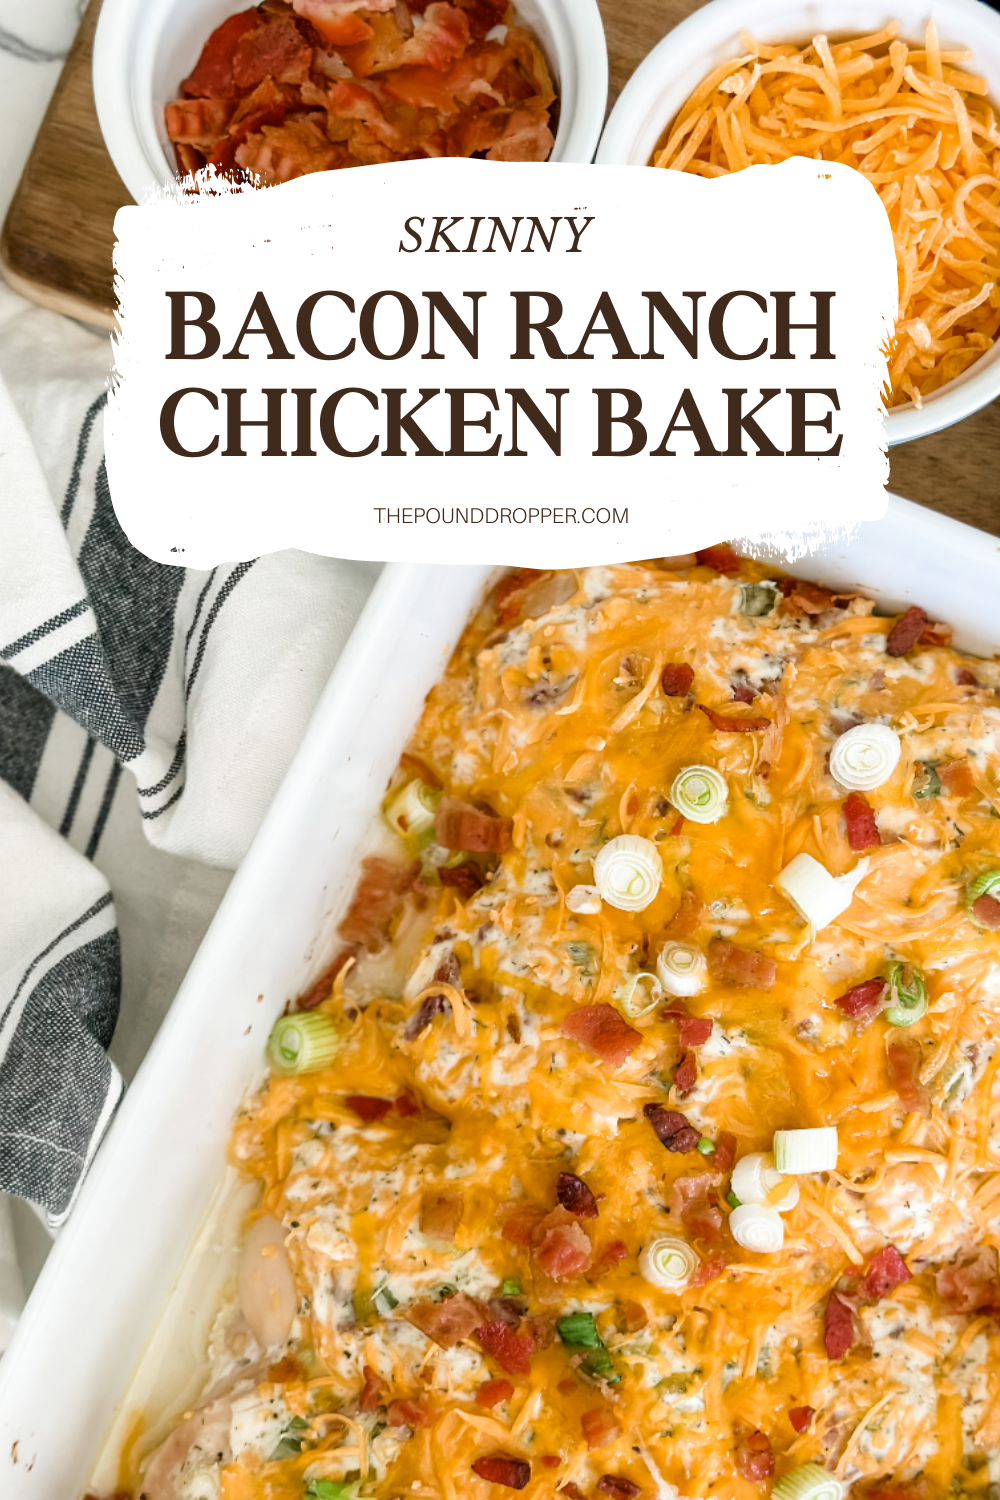 There's just something comforting about a homemade casserole and this Skinny Bacon Ranch Chicken Bake has all of the best flavors-chicken, creamy cream cheese mixed with green onions, ranch seasonings, bacon! It's naturally gluten-free, low carb, and makes for the tastiest weekday dinner! via @pounddropper